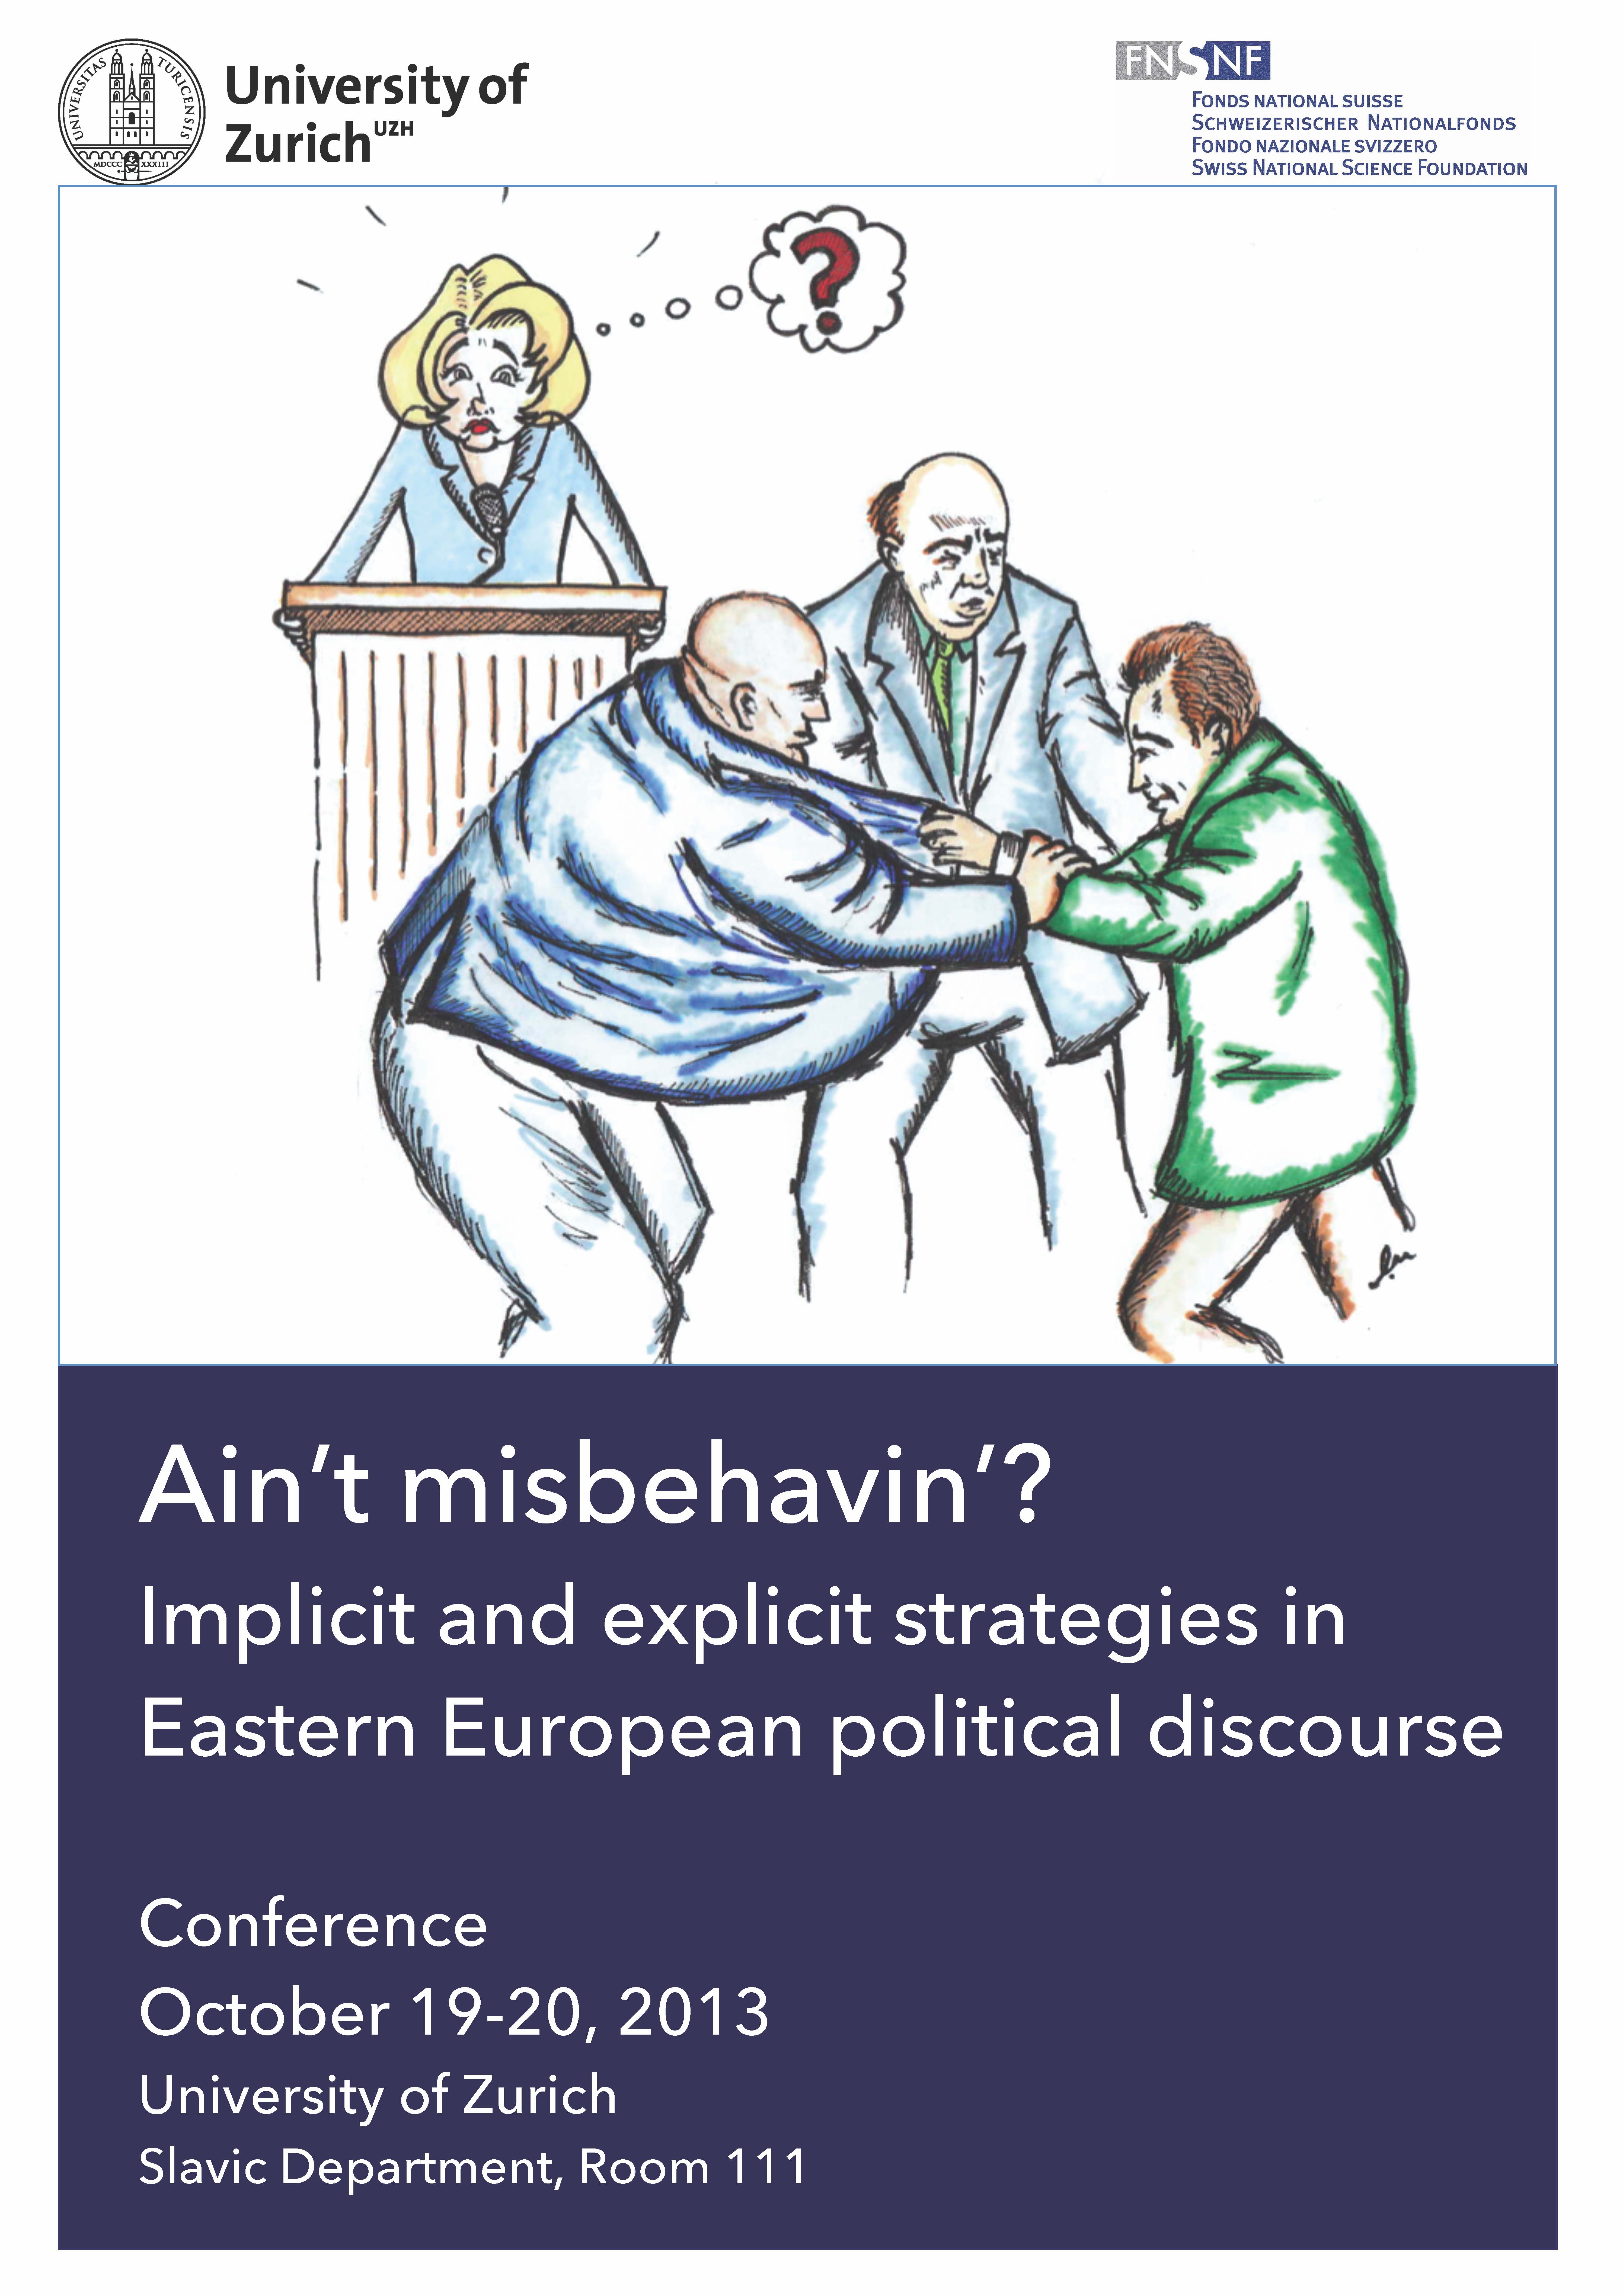 Ain't misbehavin'? Implicit and explicit strategies in Eastern European political discourse